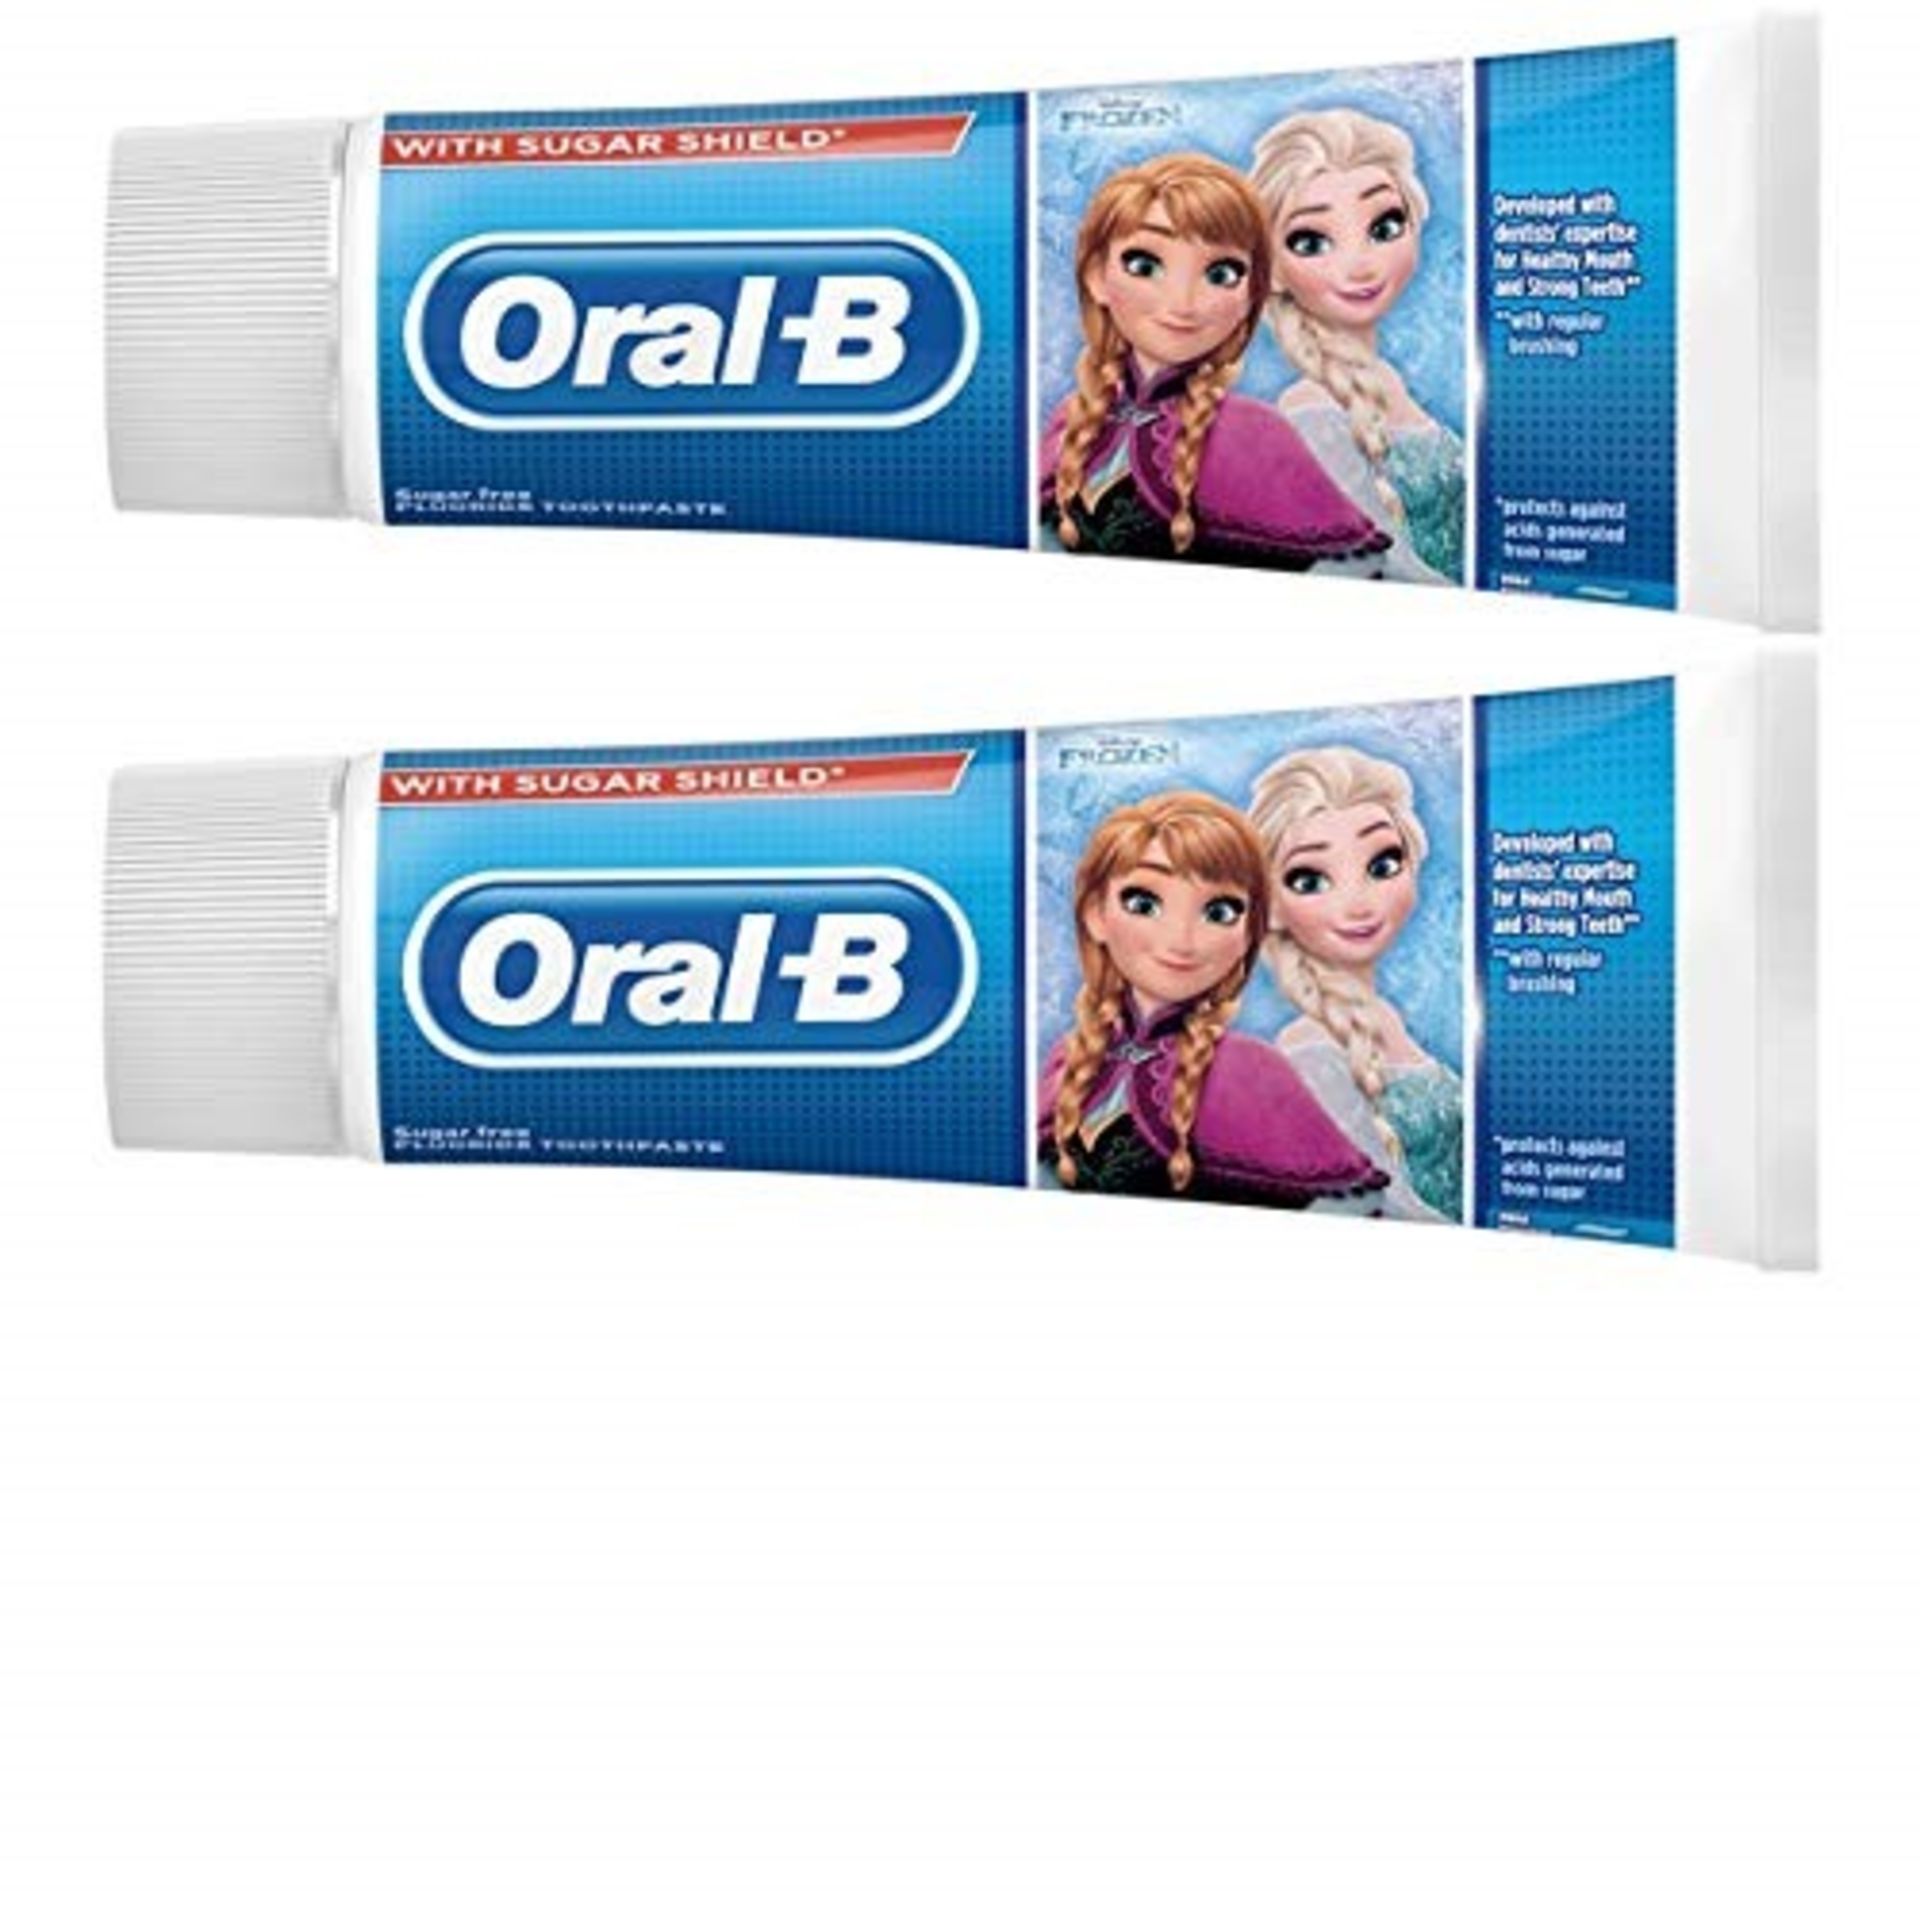 Oral-B Disney Frozen Pro-Expert Stages Kids Toothpaste 75 ml X 2 - Image 3 of 4